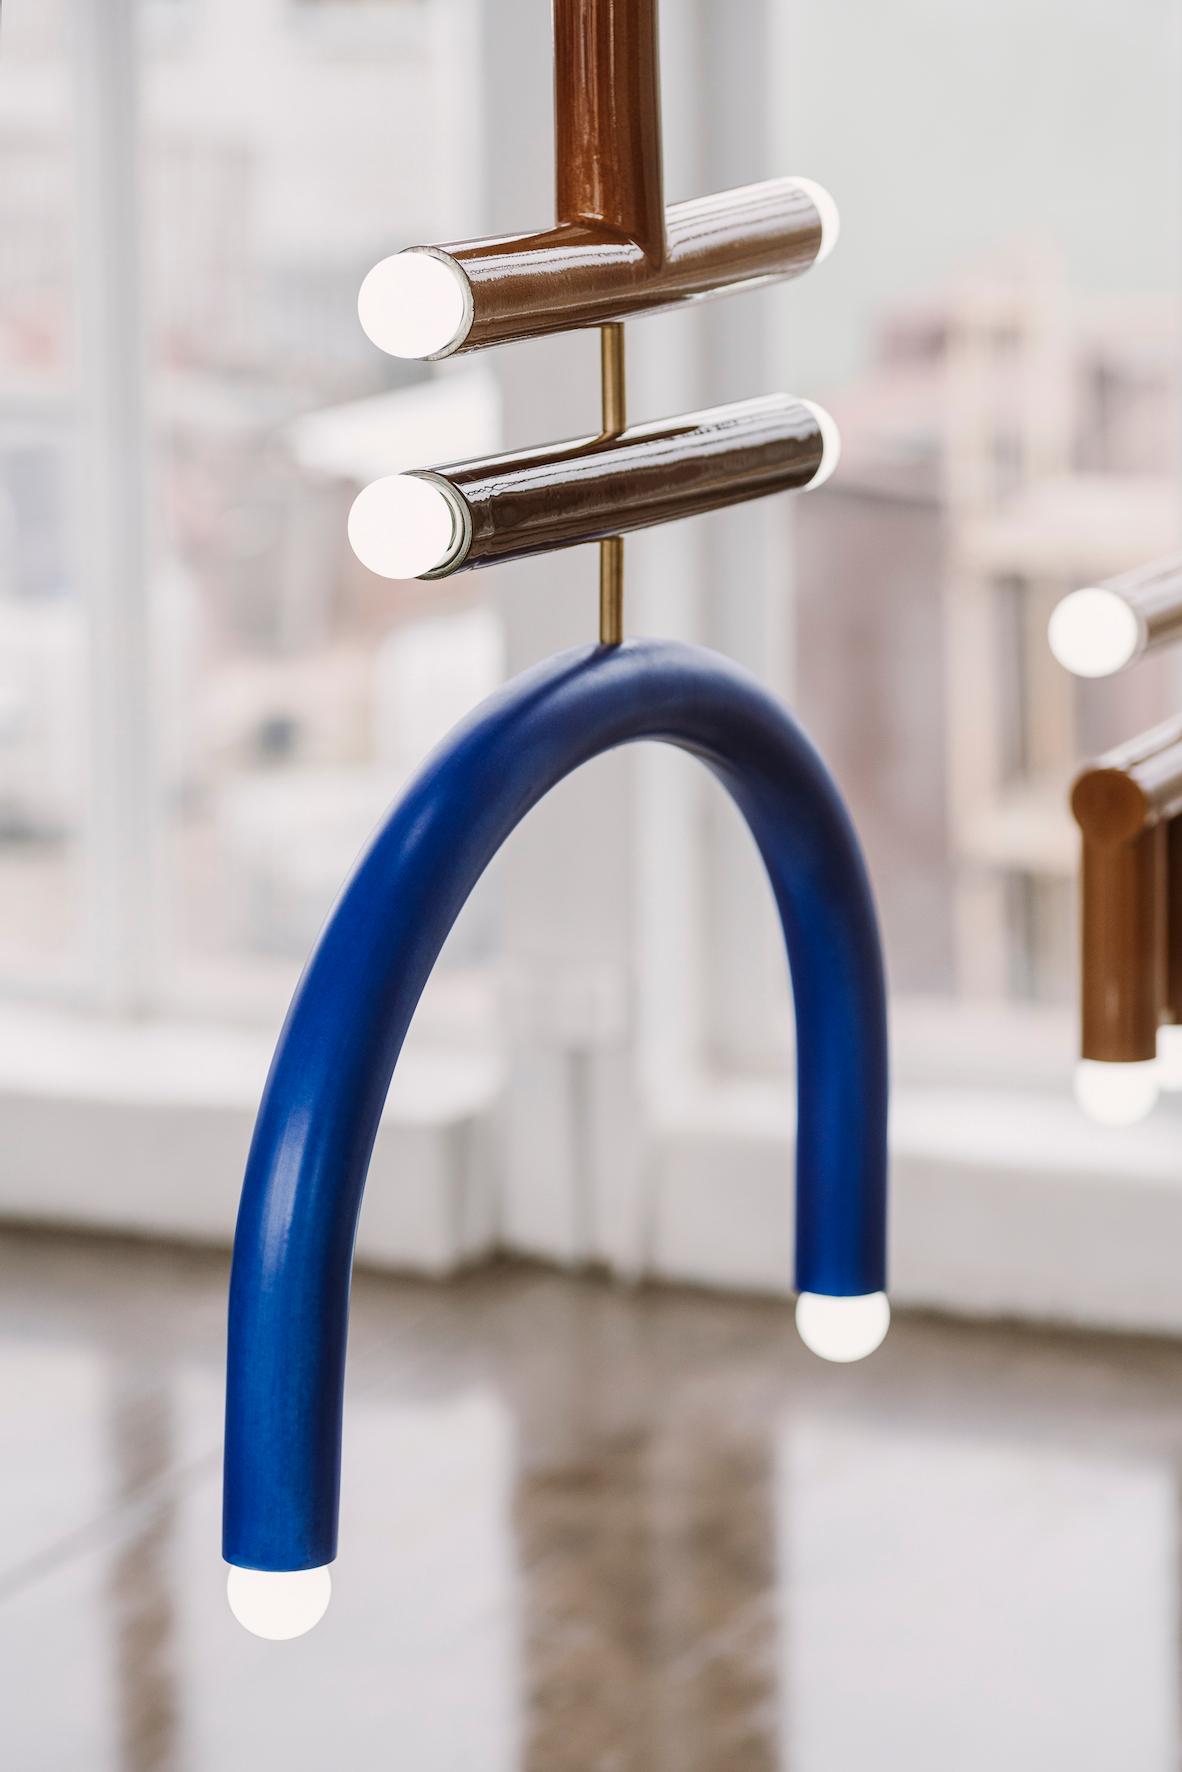 TRN F3 Pendant lamp / ceiling lamp / chandelier 
Designer: Pani Jurek

Dimensions: H 48 x 55 x 5 cm
Bulb (not included): E27/E26, compatible with US electric system

- Steel blue -
- Big arc Brown
- navy blue little arc

Total Height: 54,5'' (=